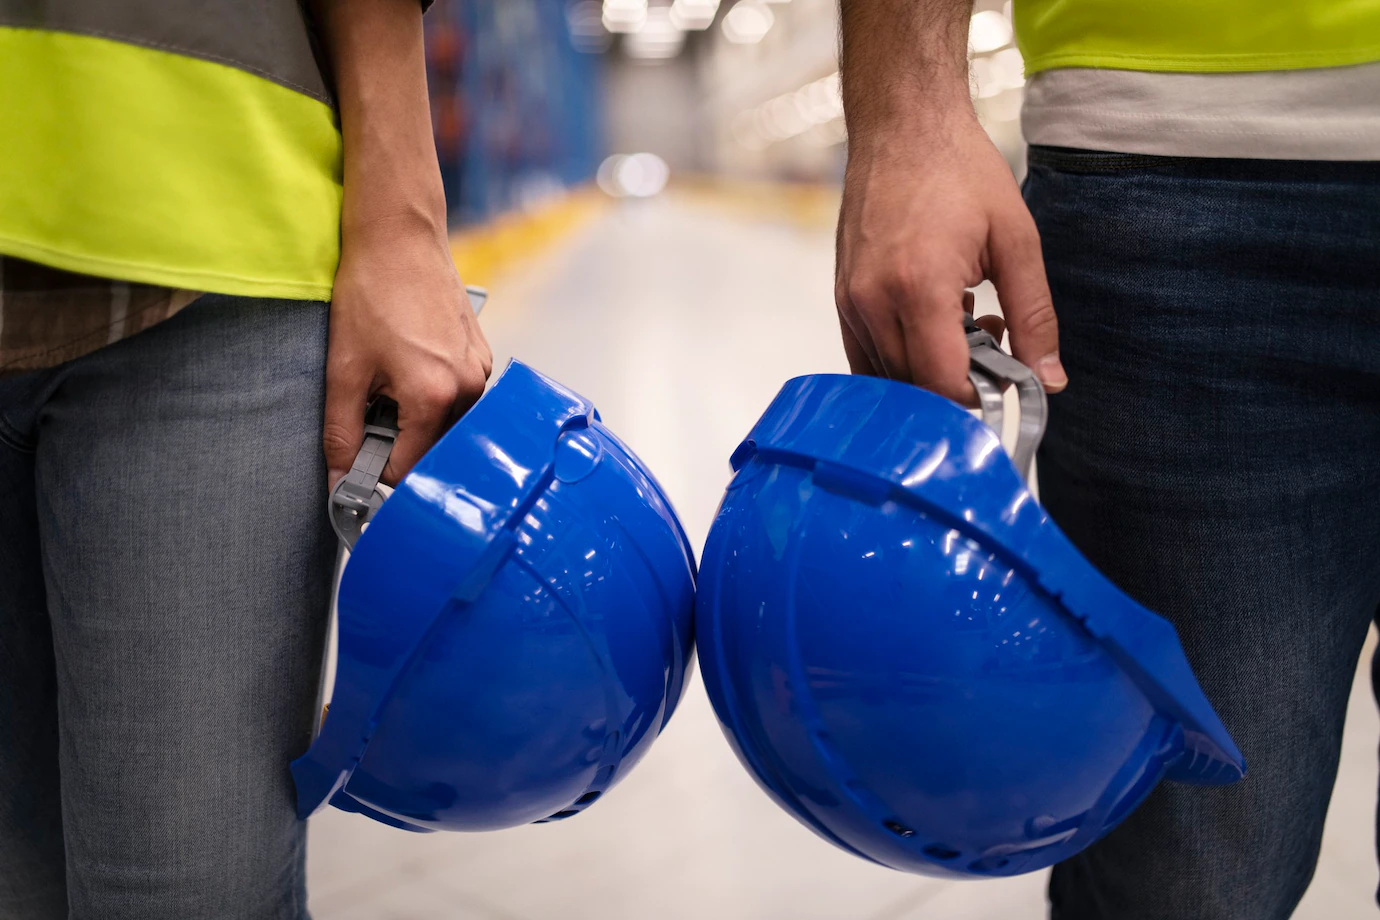 Workplace Health and Safety: A Guide for HR Managers